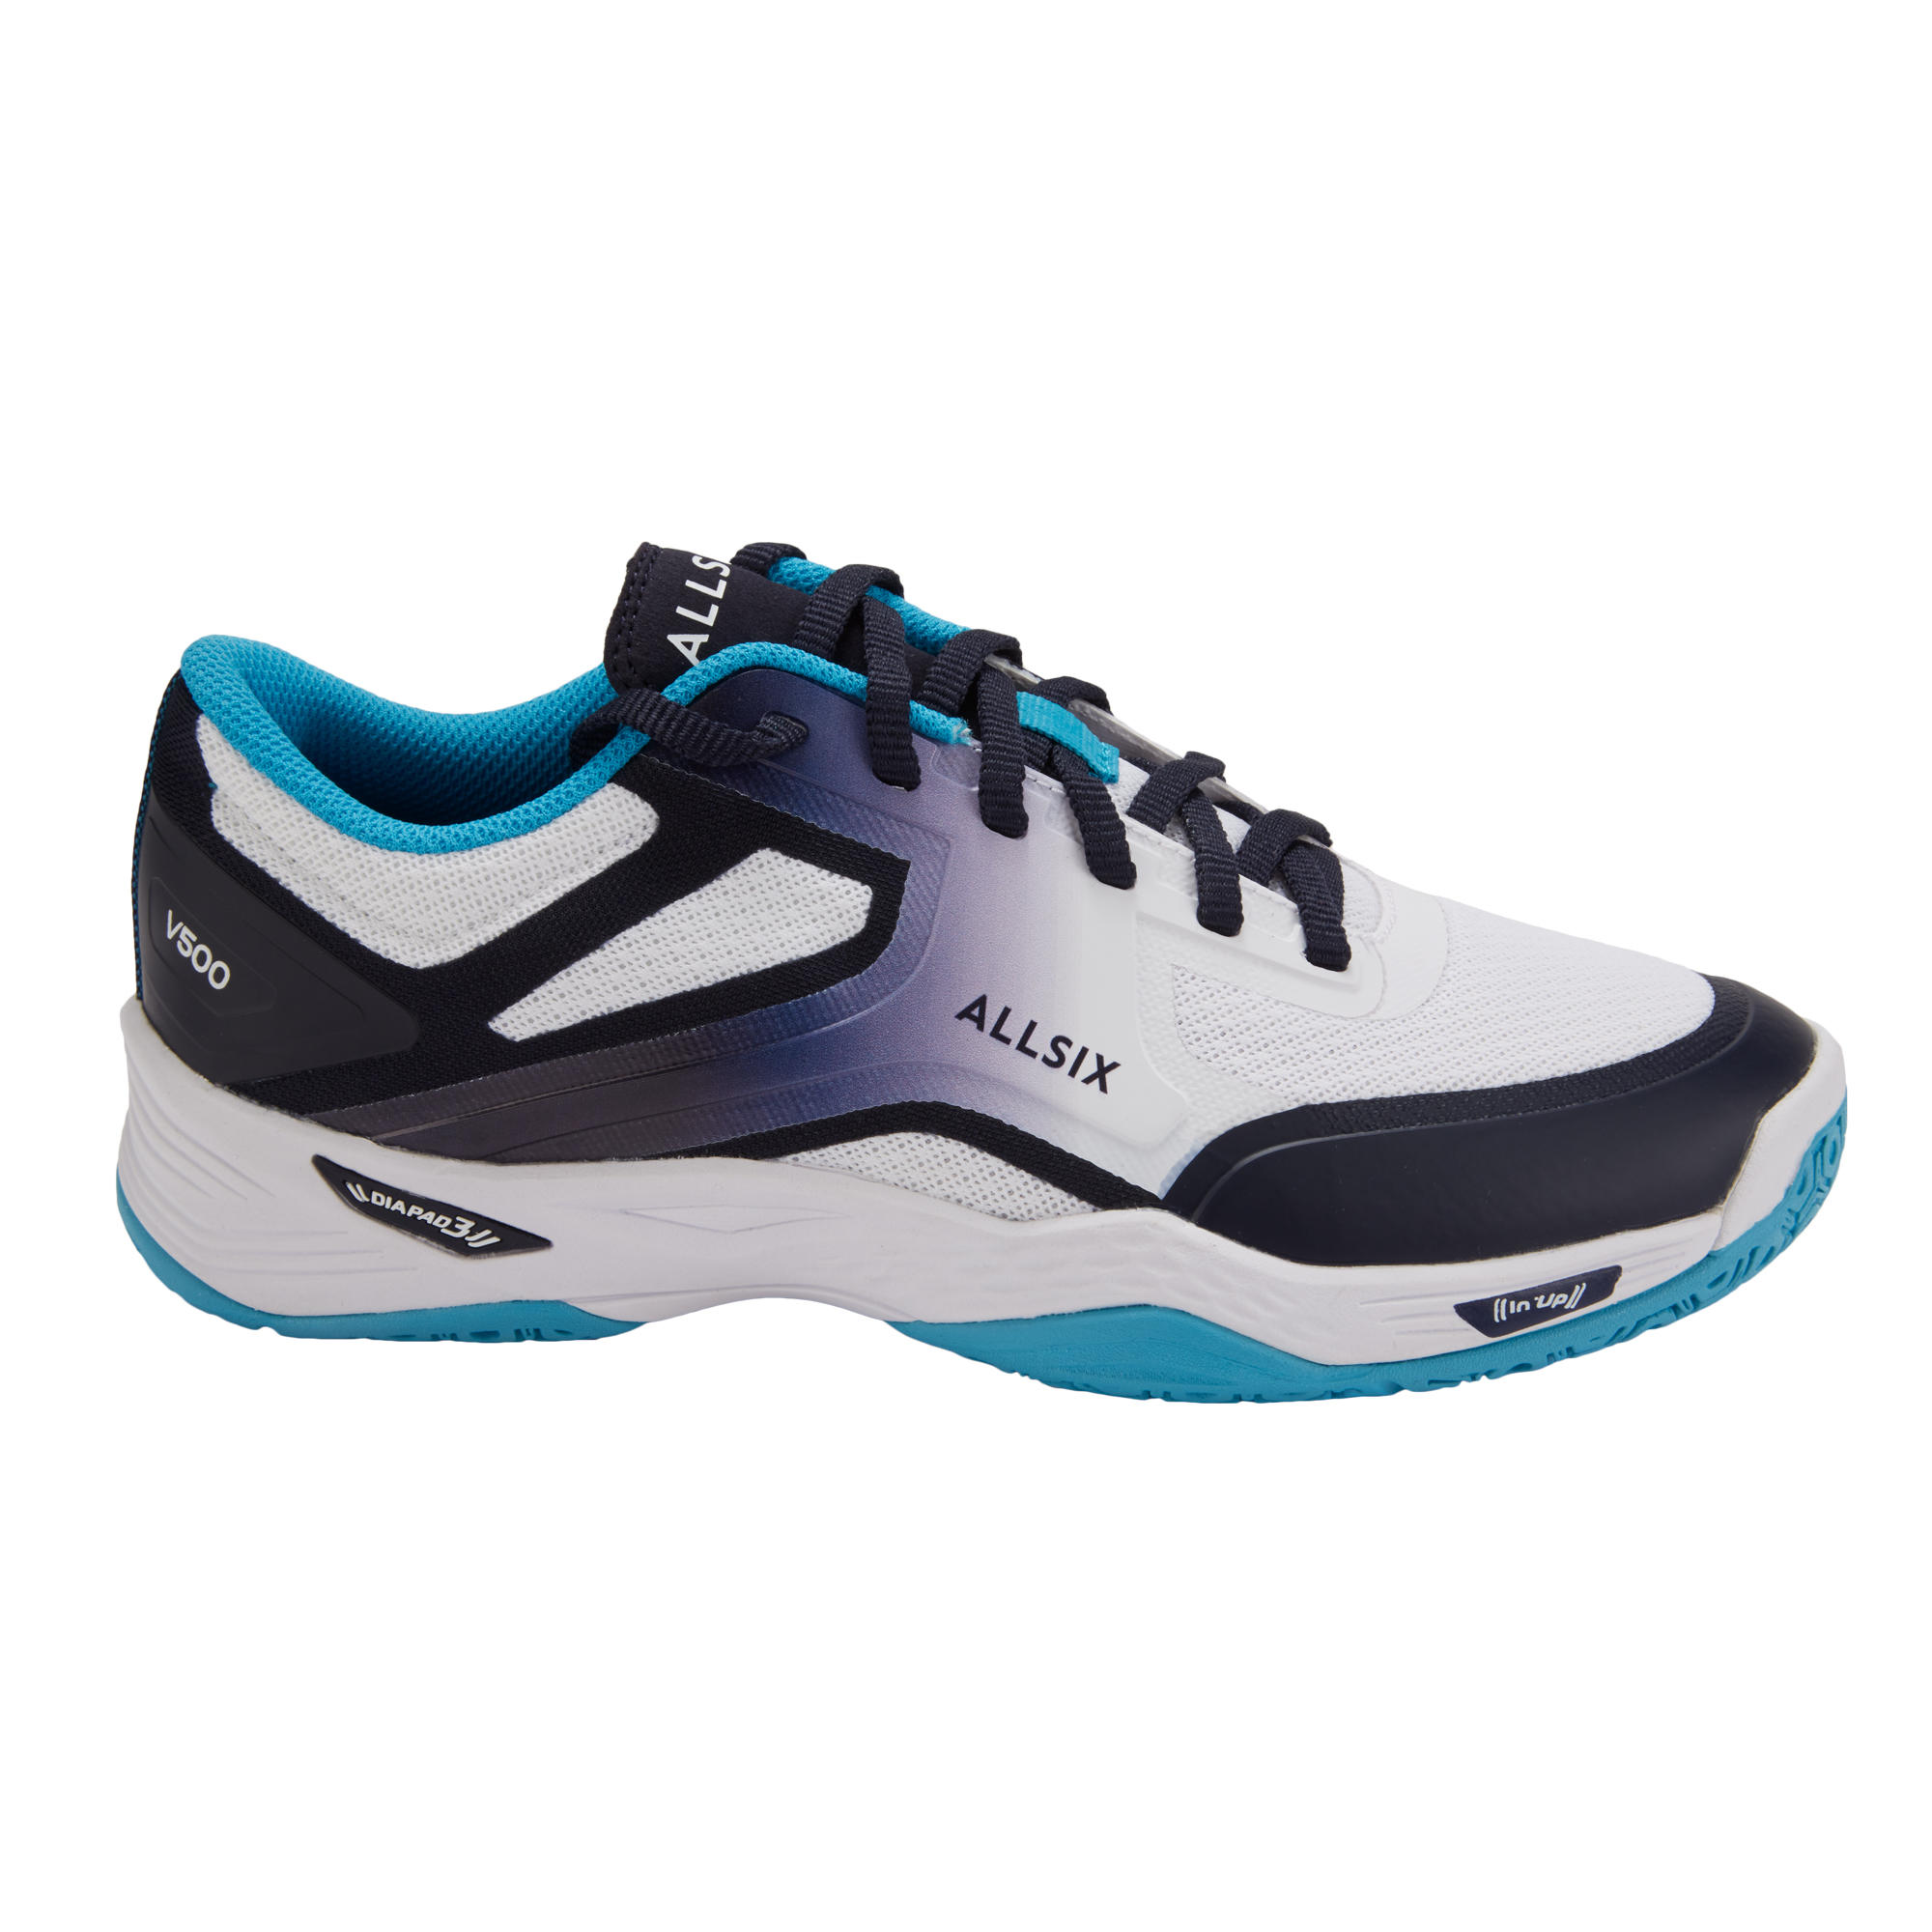 ALLSIX Women's Volleyball Shoes V500 - White/Blue/Turquoise